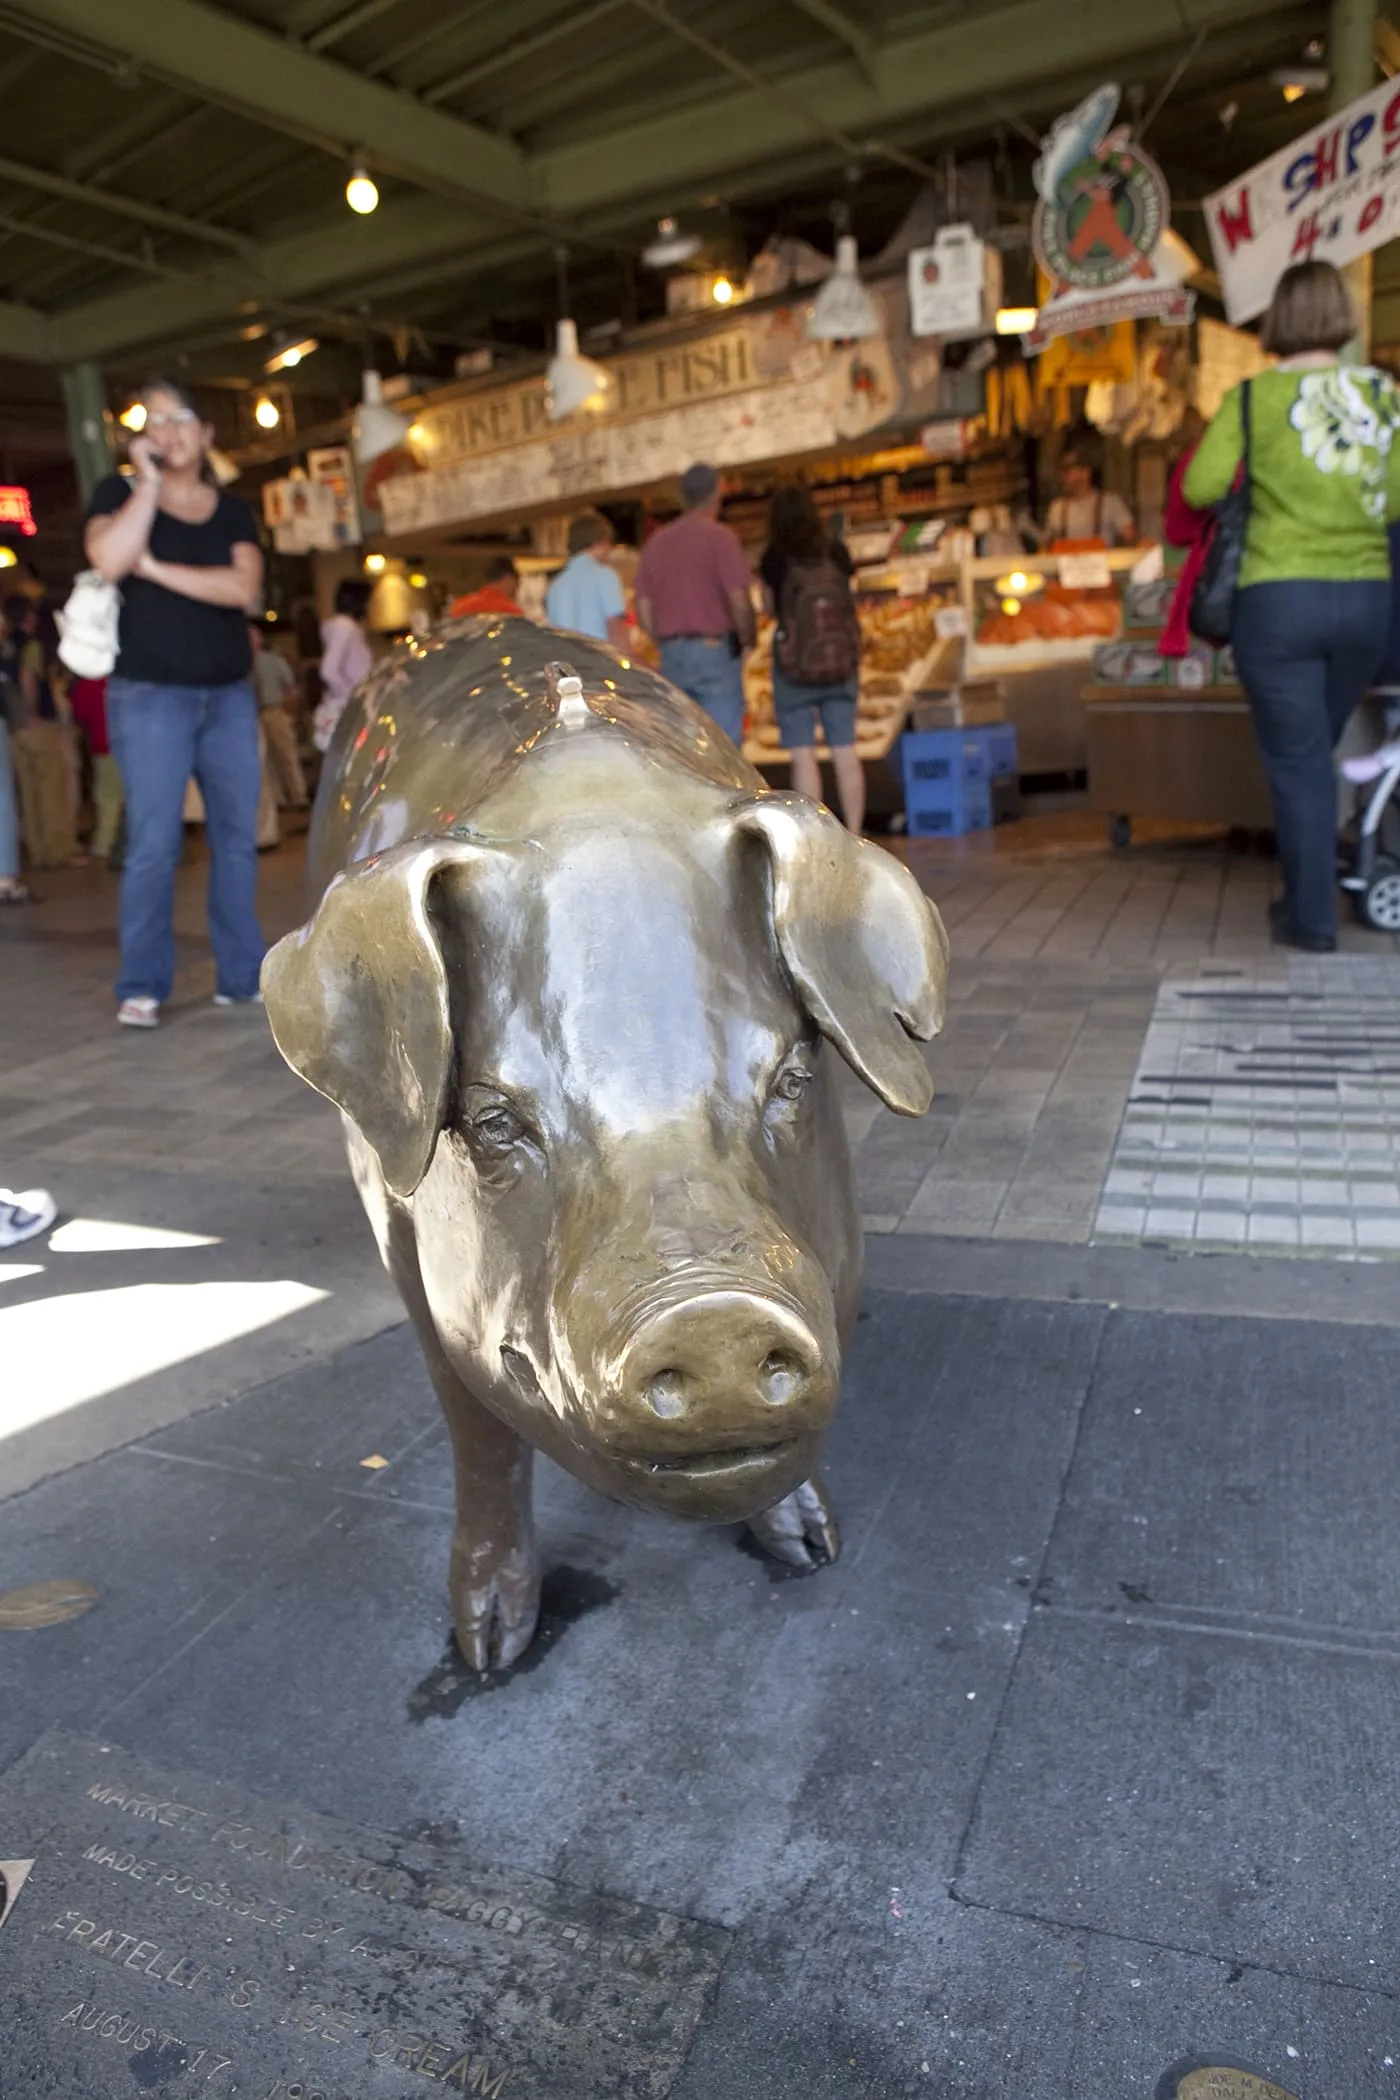 Rachel the Pig at Pike Place Market in Seattle, Washington